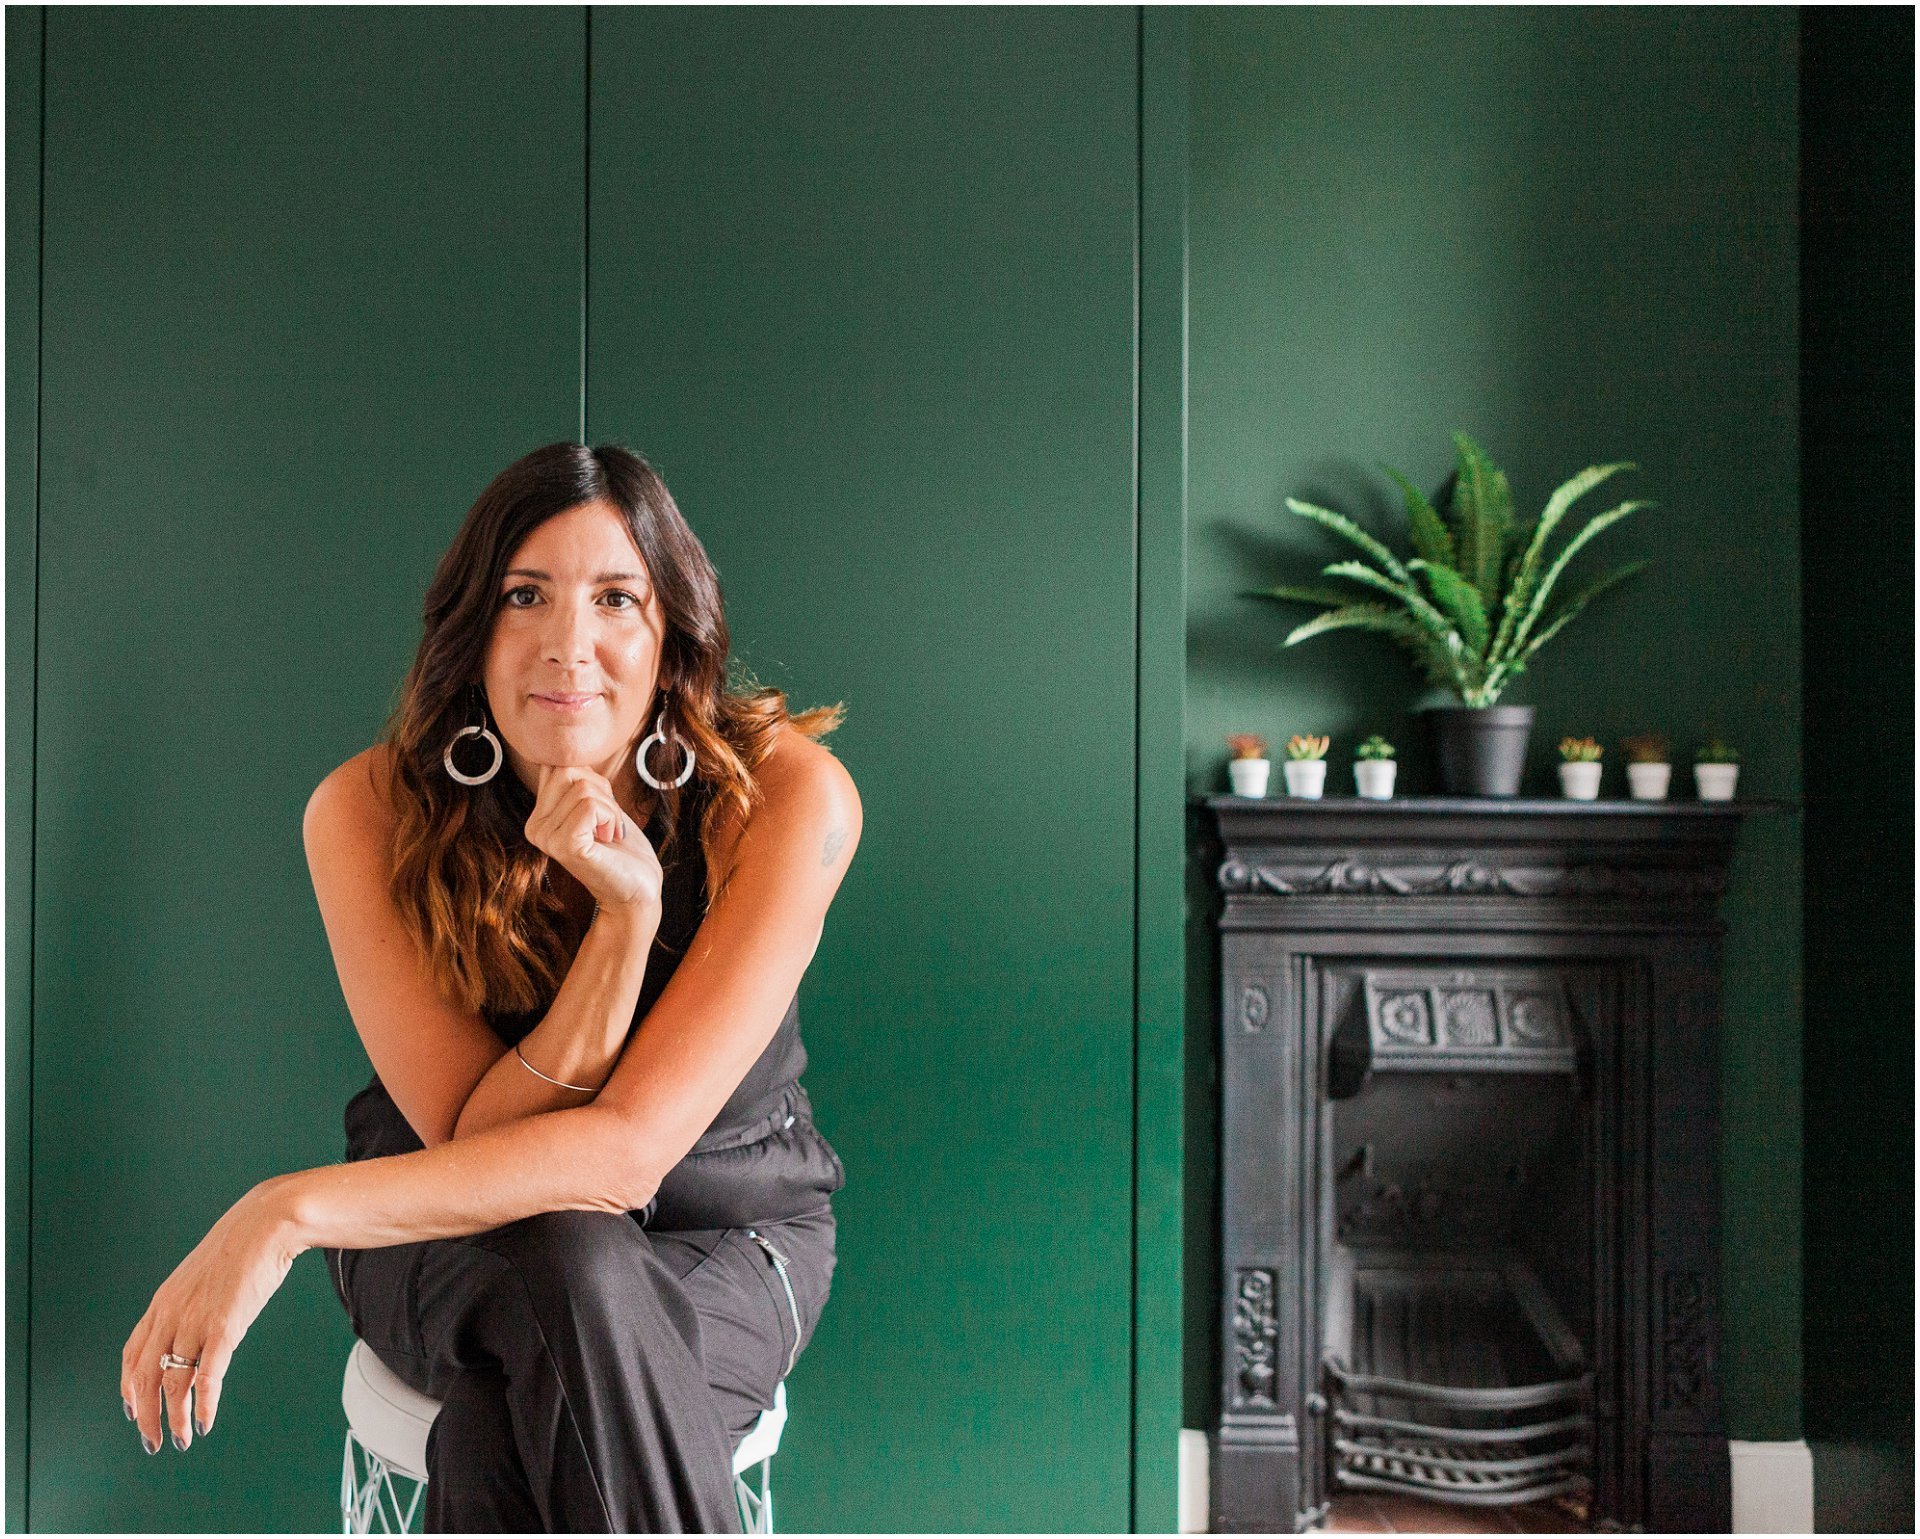 Business coach brand photography with Lisa Johnson. Images by London brand photographer AKP Branding Stories